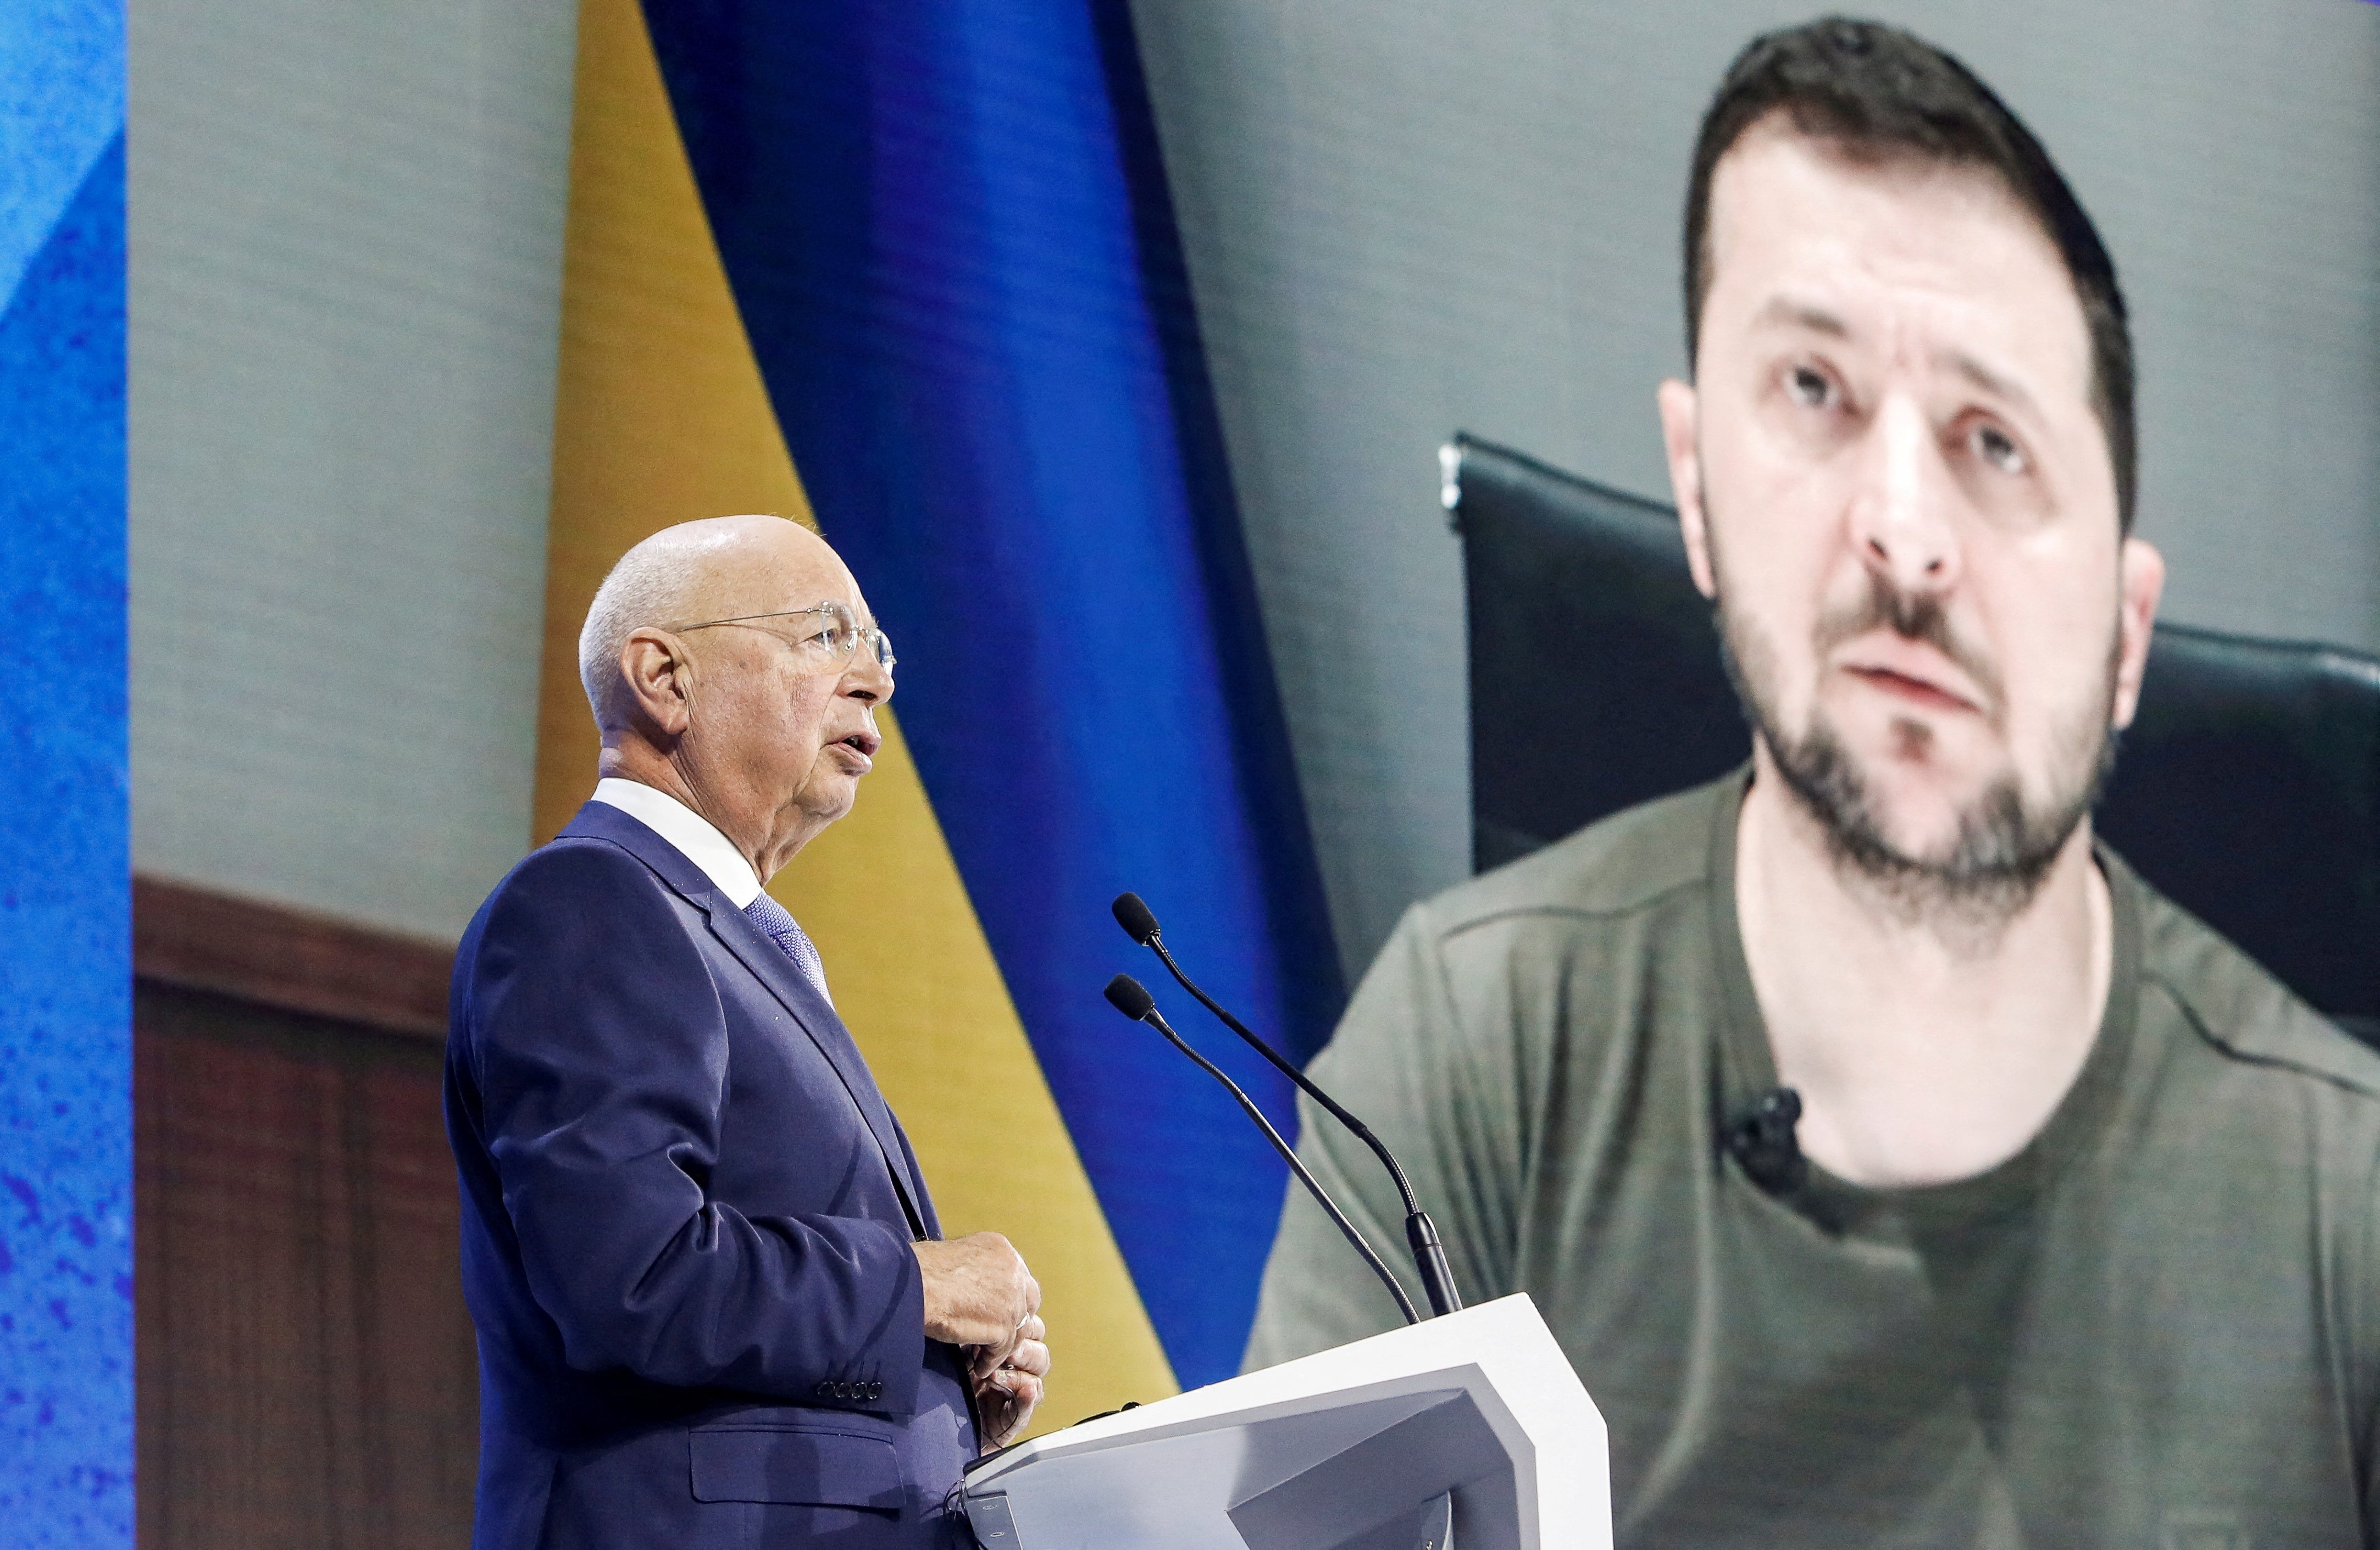 Founder and Executive chairman Klaus Schwab addresses the delegates with the Ukraine’s President Volodymyr Zelensky displayed on a screen in the background during the opening ceremony of the World Economic Forum (WEF) in Davos